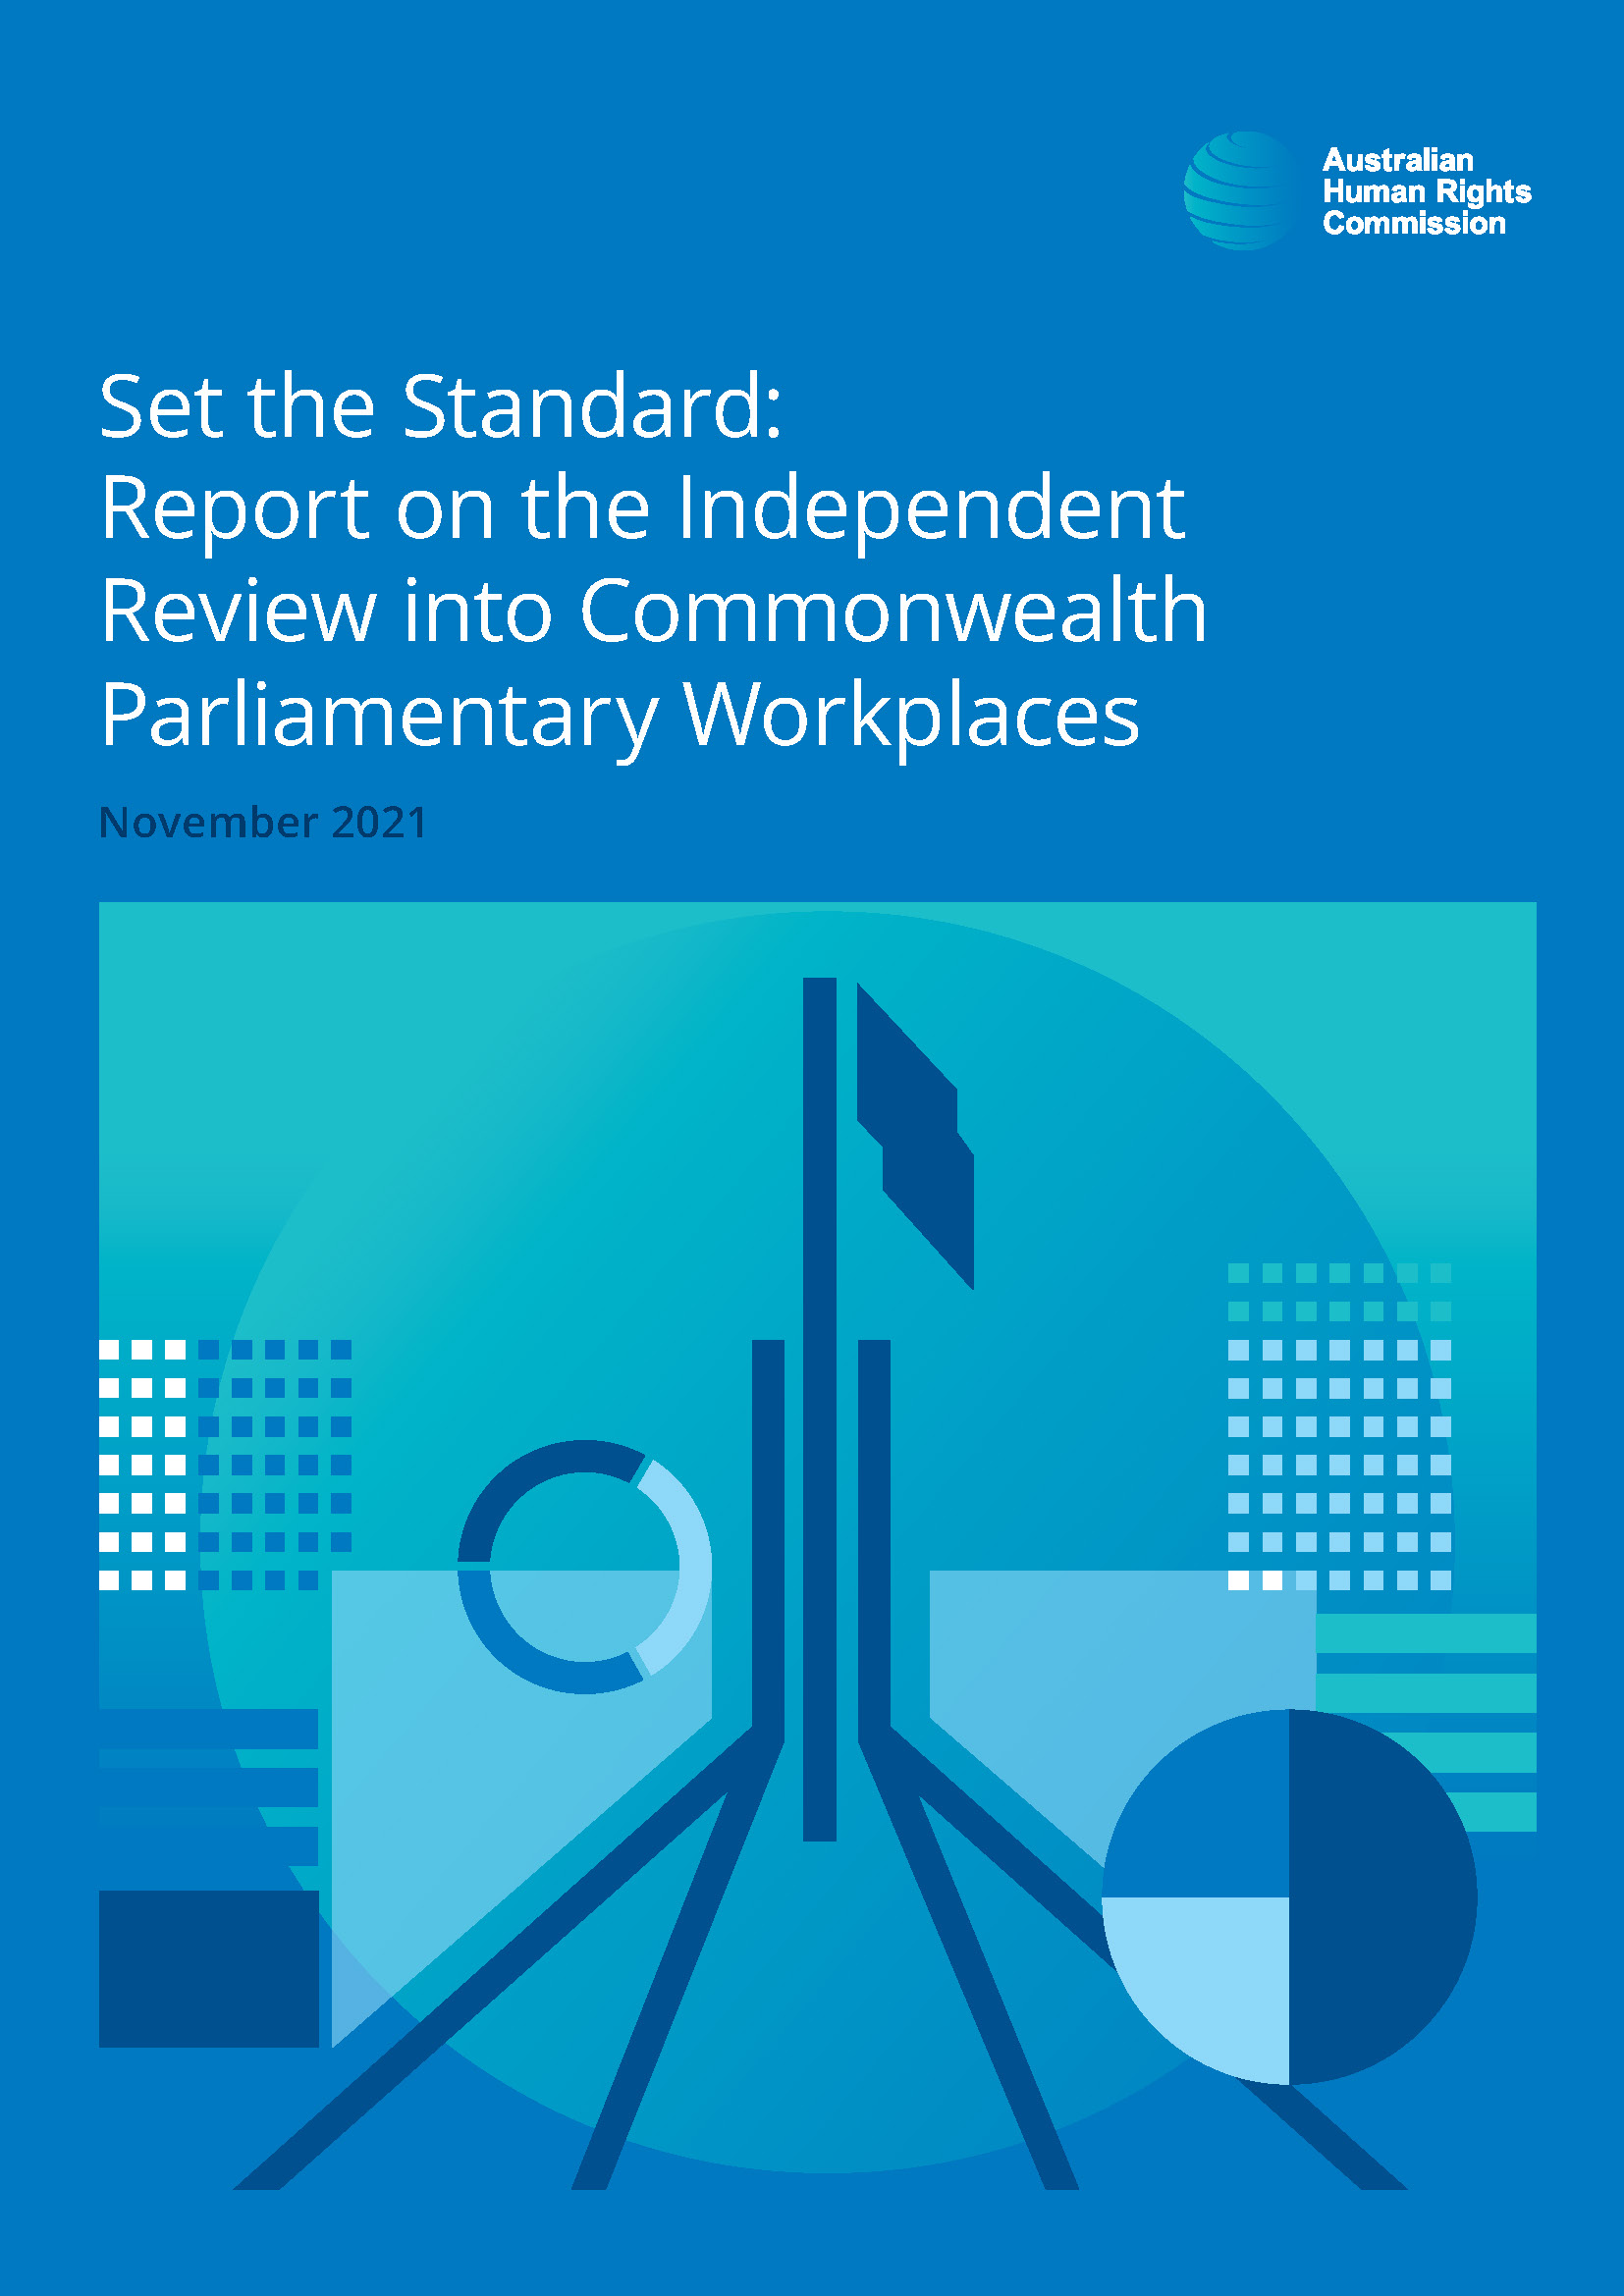 Set the Standard Report cover page, Image source: Australian Human Rights Commission